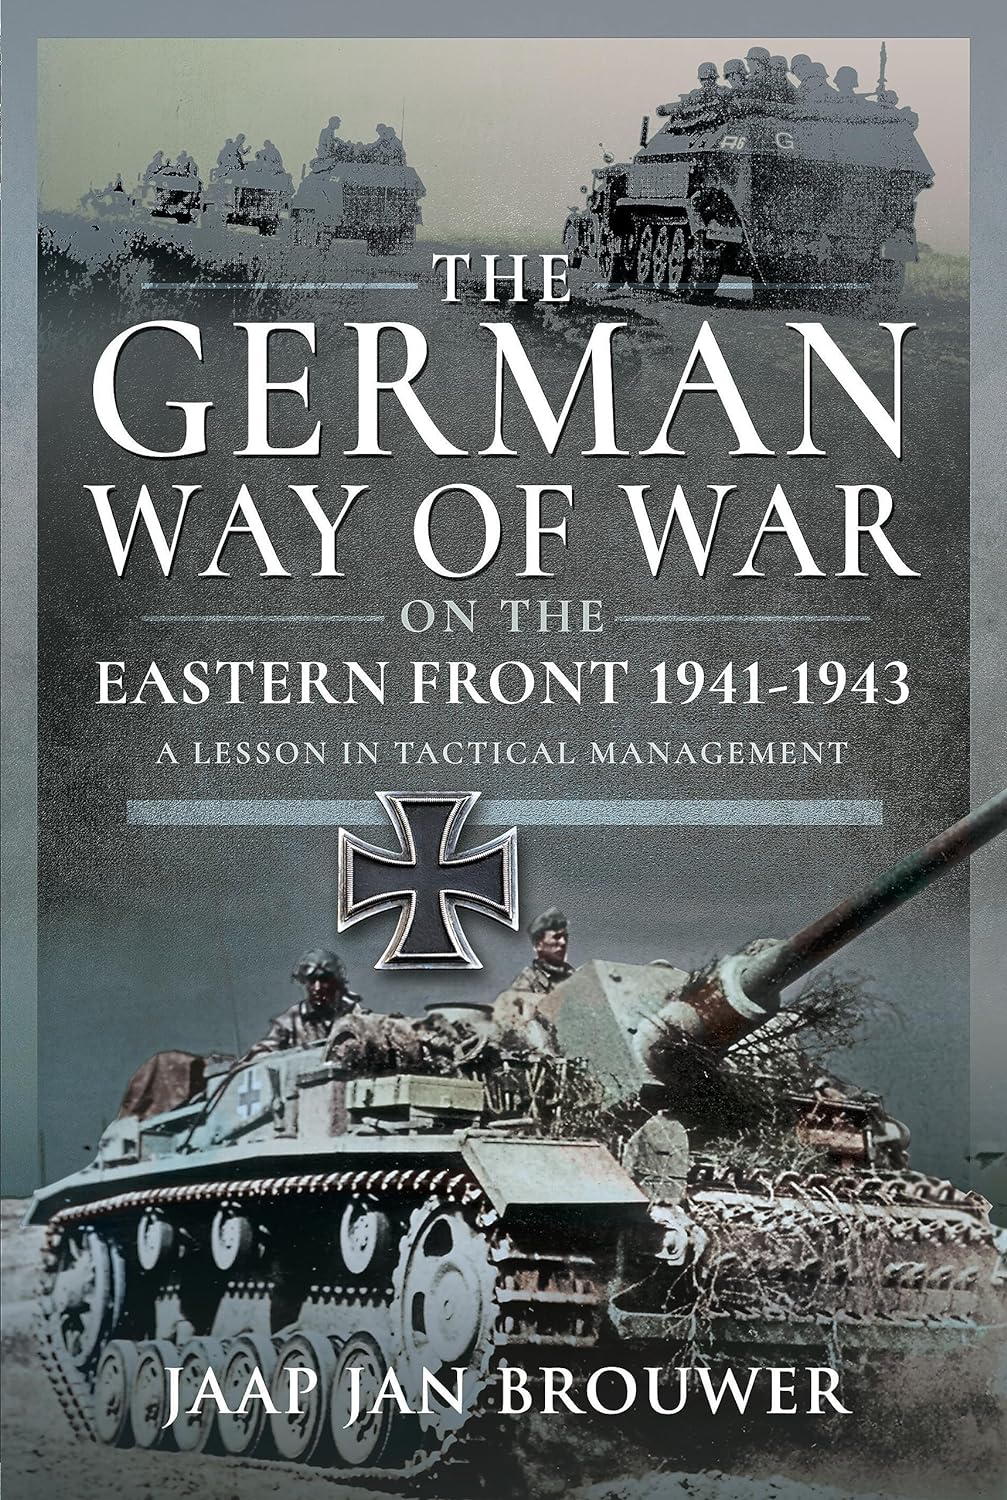 The German Way of War on the Eastern Front 1941-1934